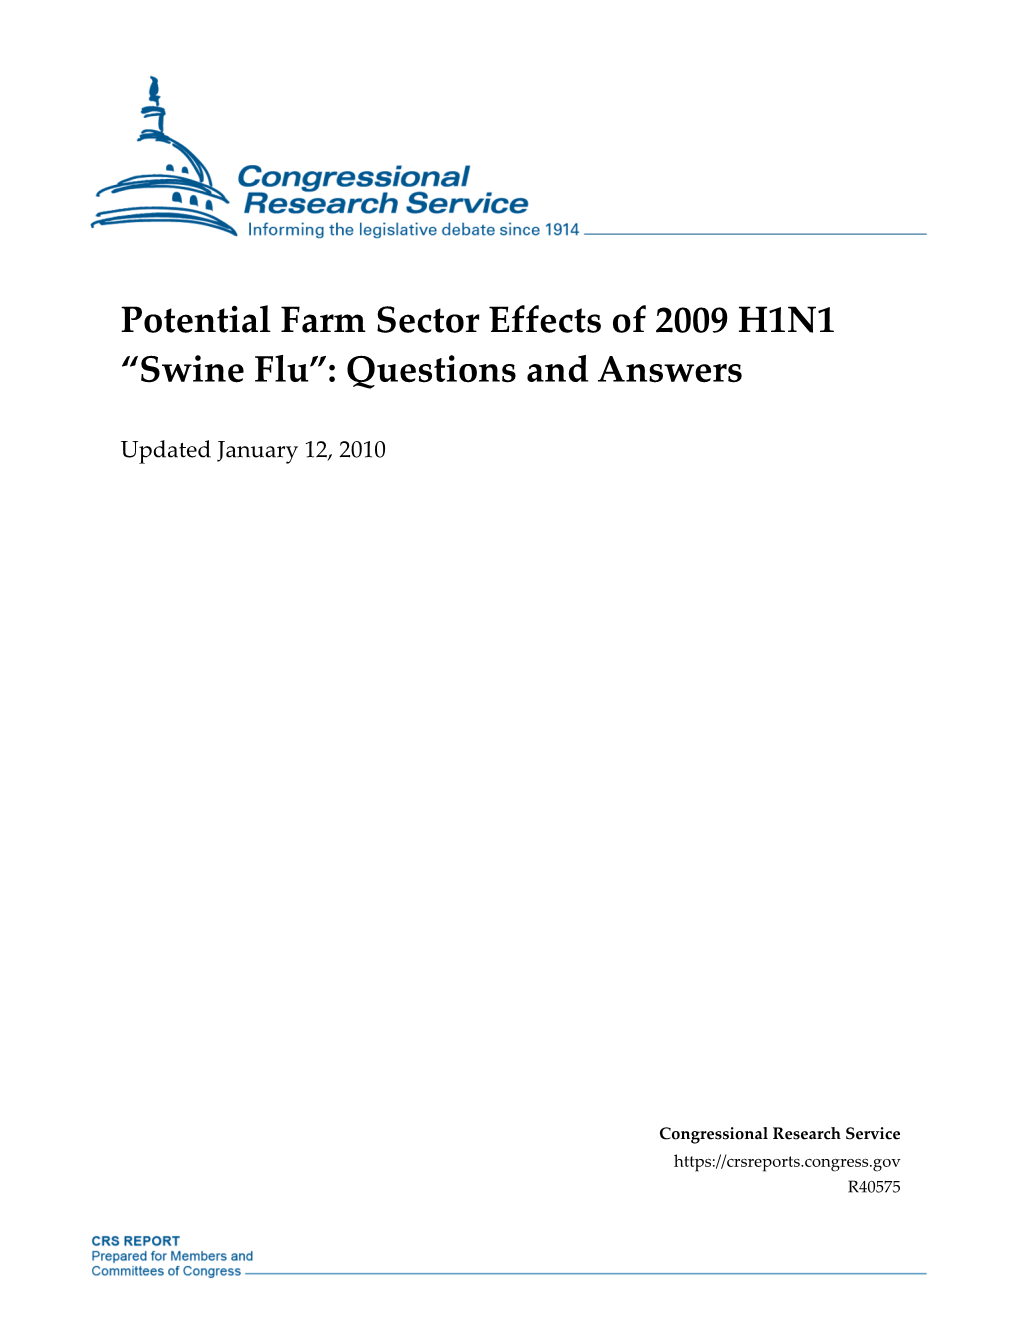 Potential Farm Sector Effects of 2009 H1N1 “Swine Flu”: Questions and Answers